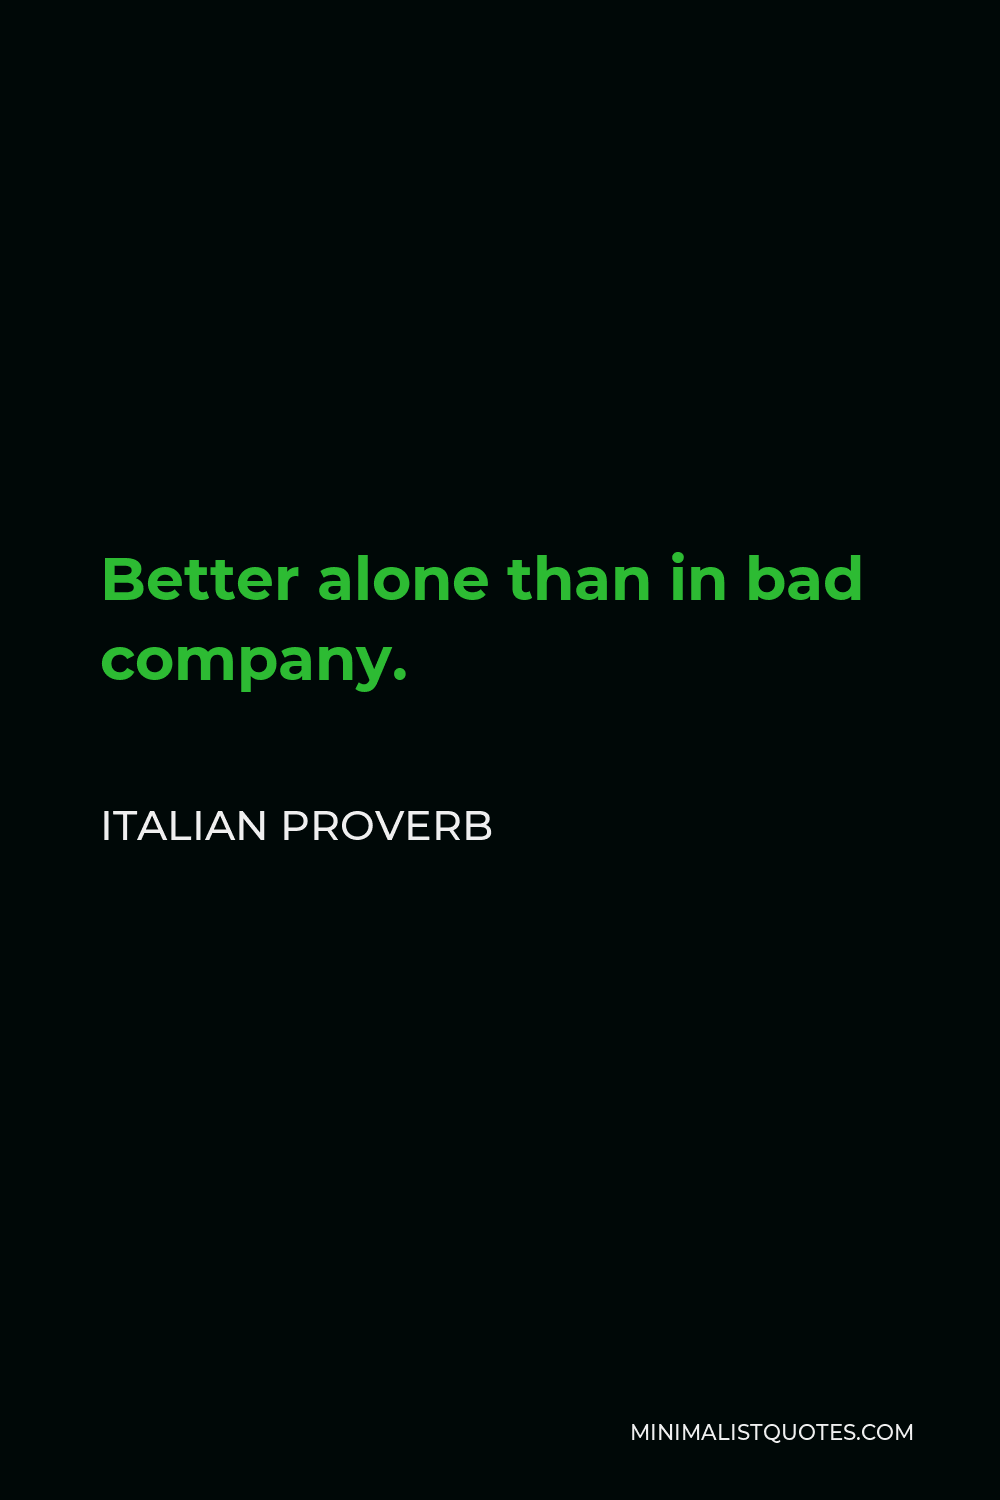 Italian Proverb Quote - Better alone than in bad company.